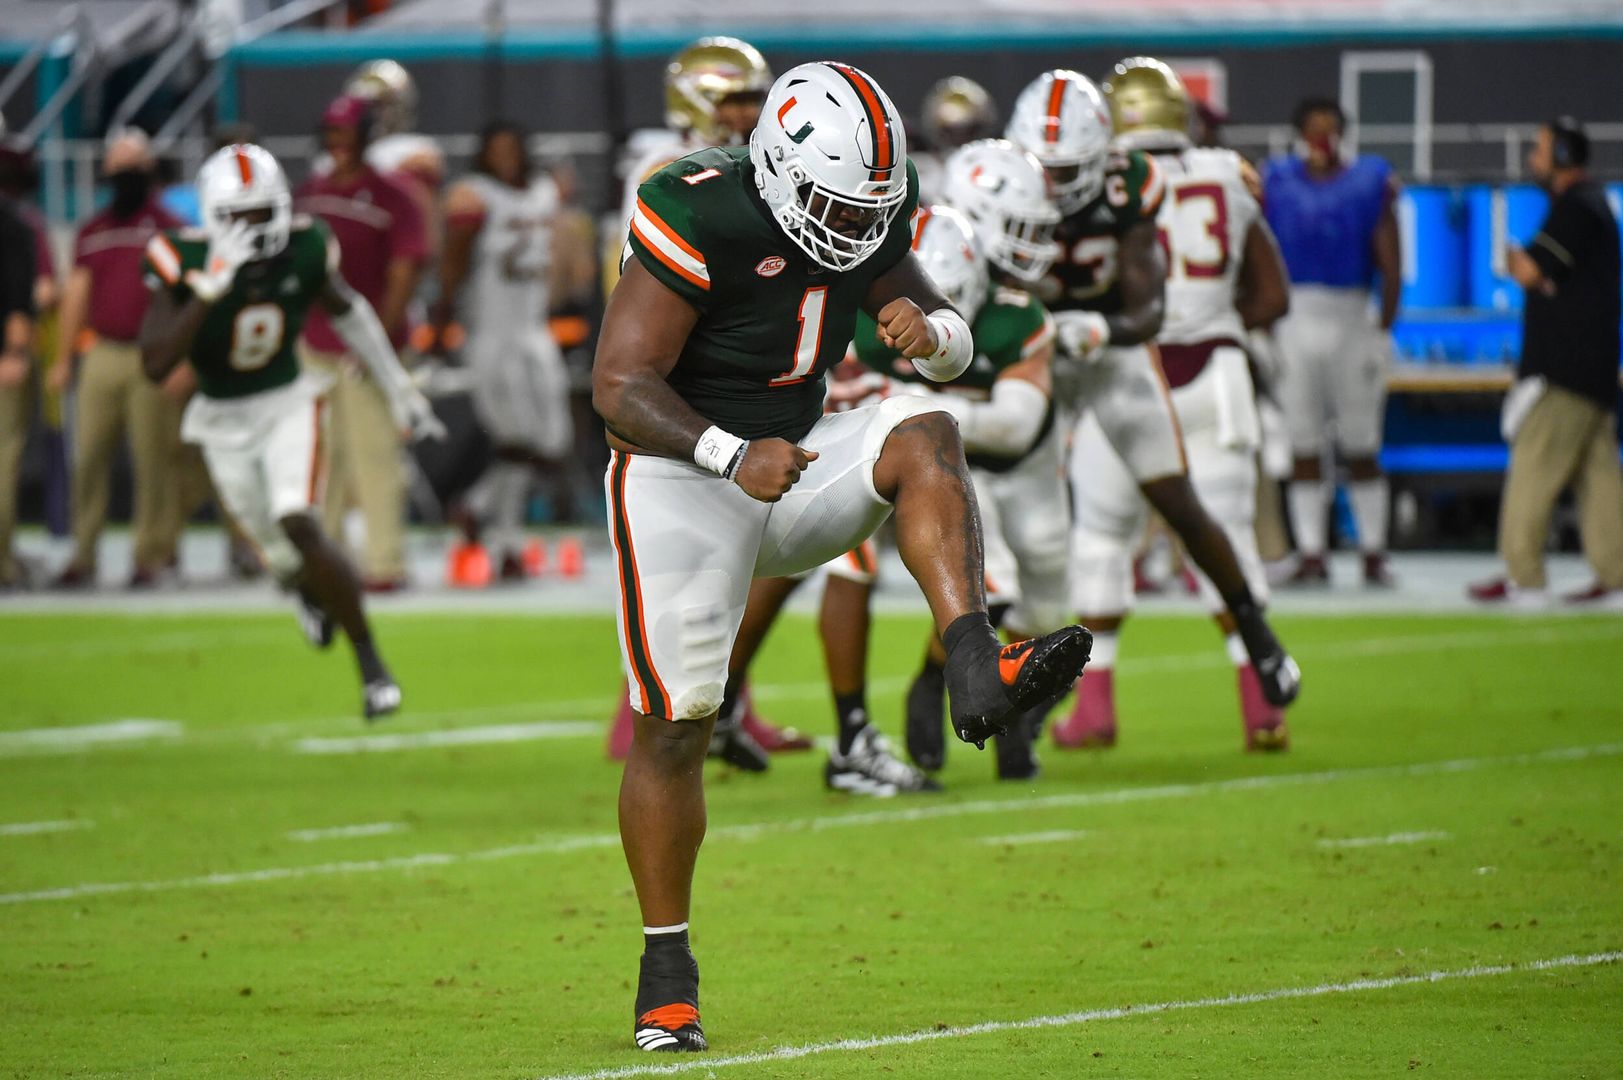 Hurricanes Ranked in Top 10 of Both Polls